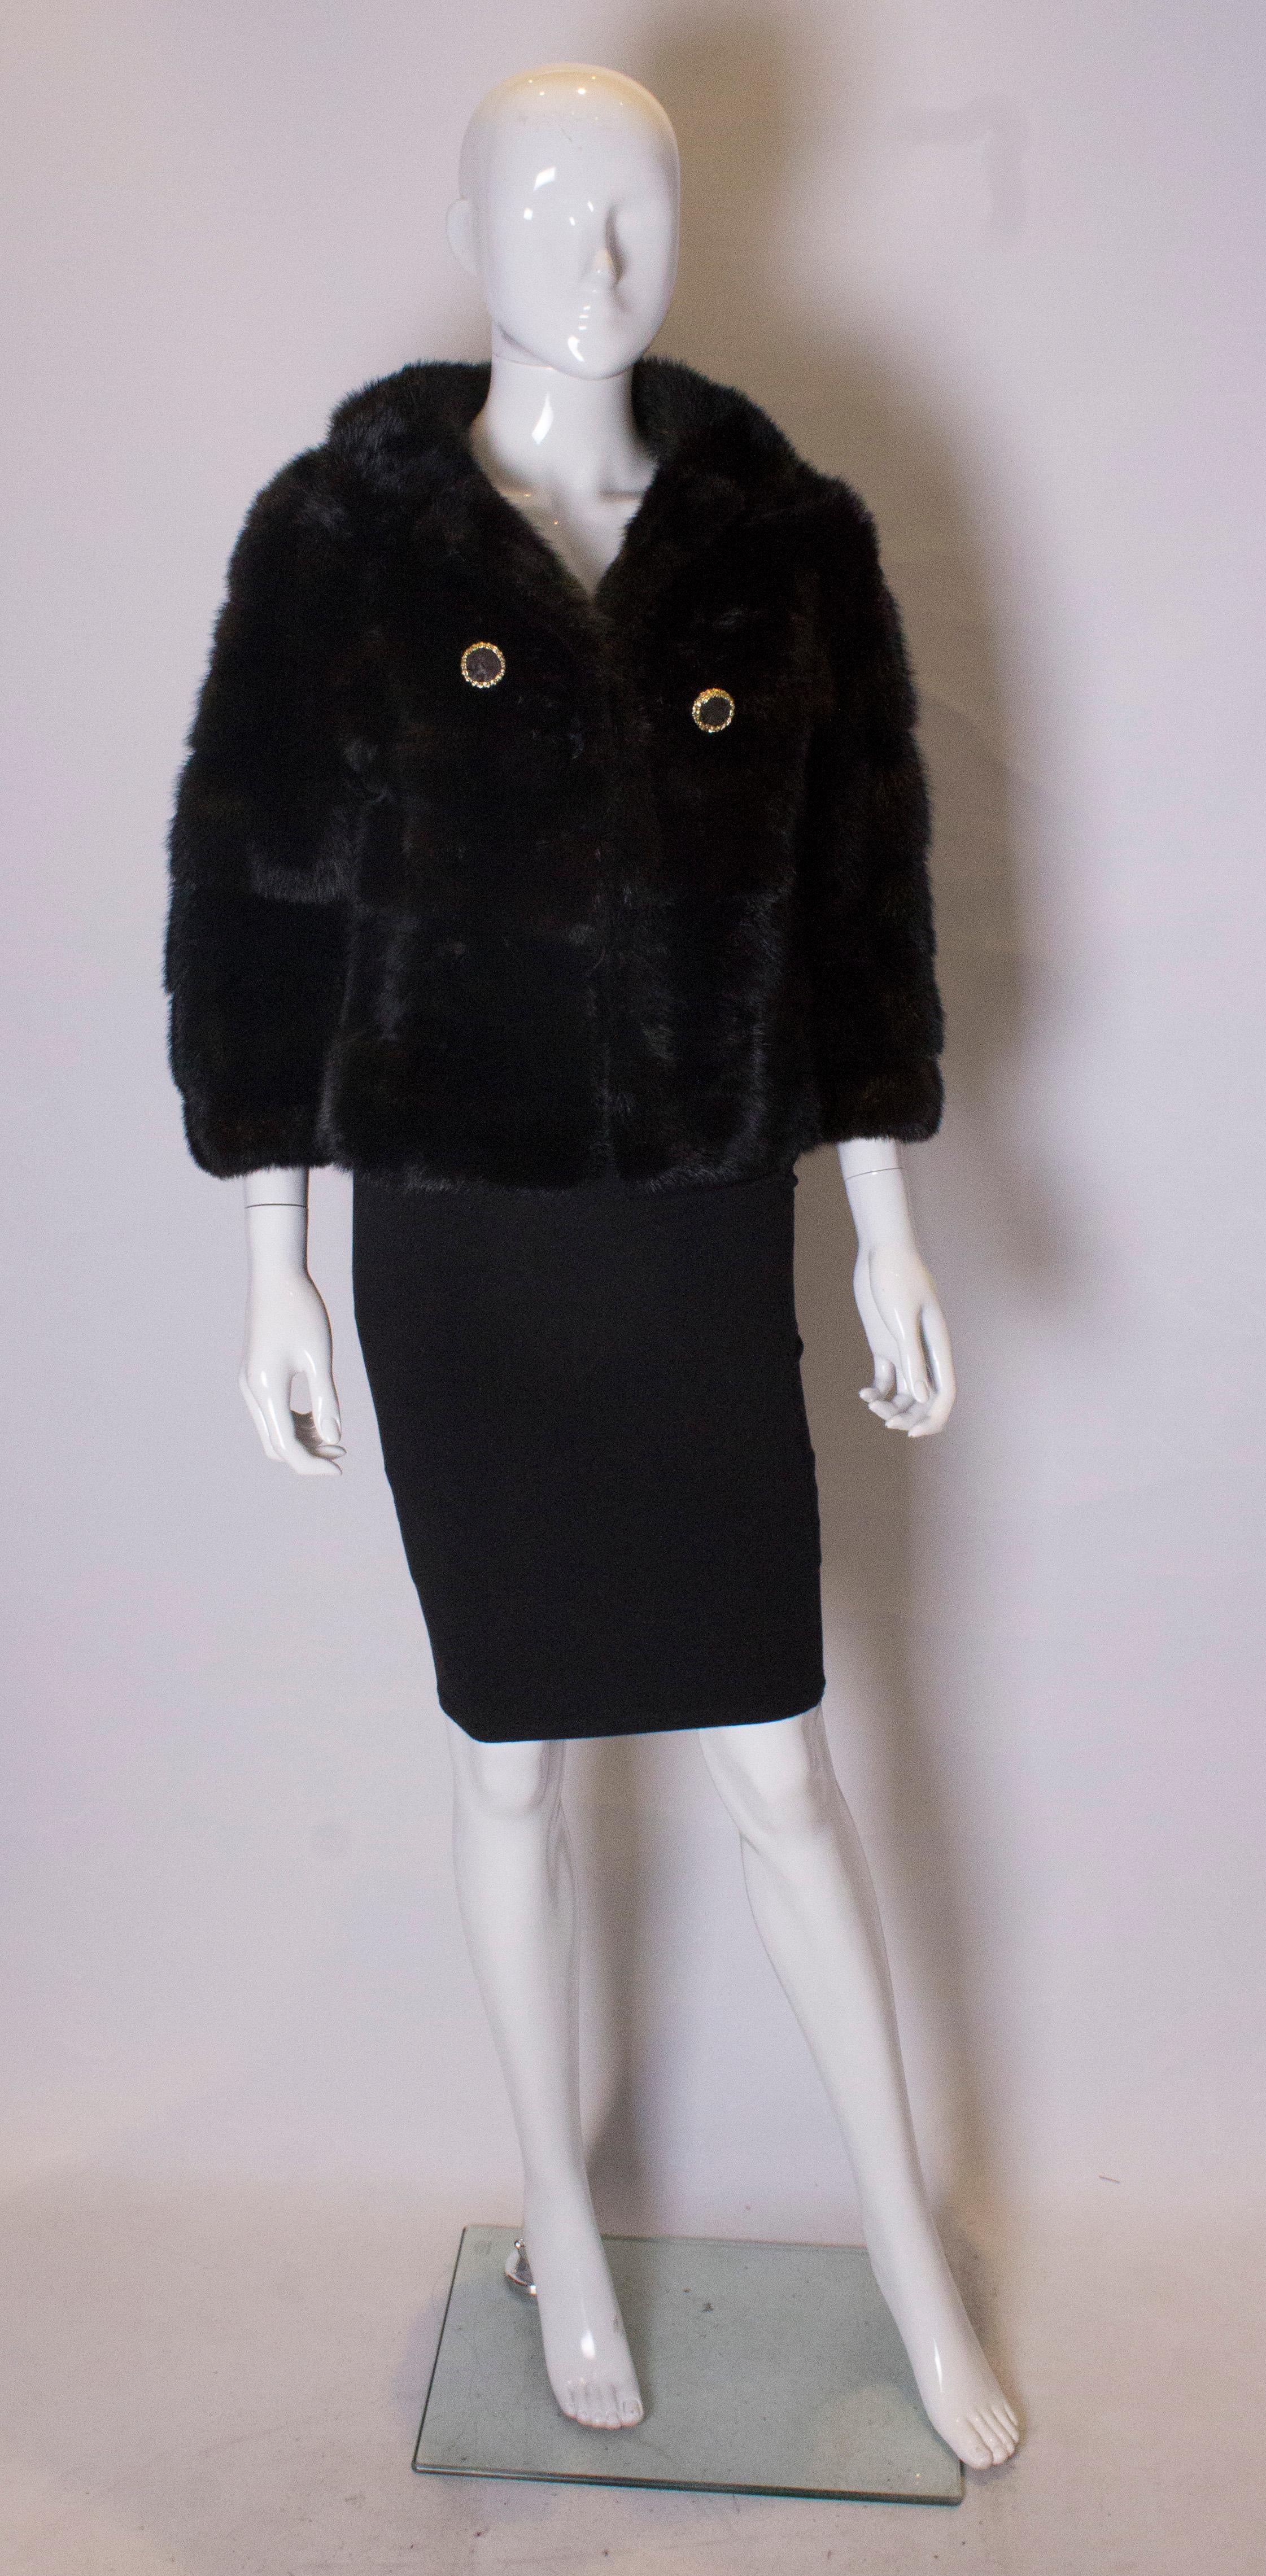 A chic dark mink jacket  with elbow length bracelet sleaves. The jacket has a v neckline and is fully lined. 